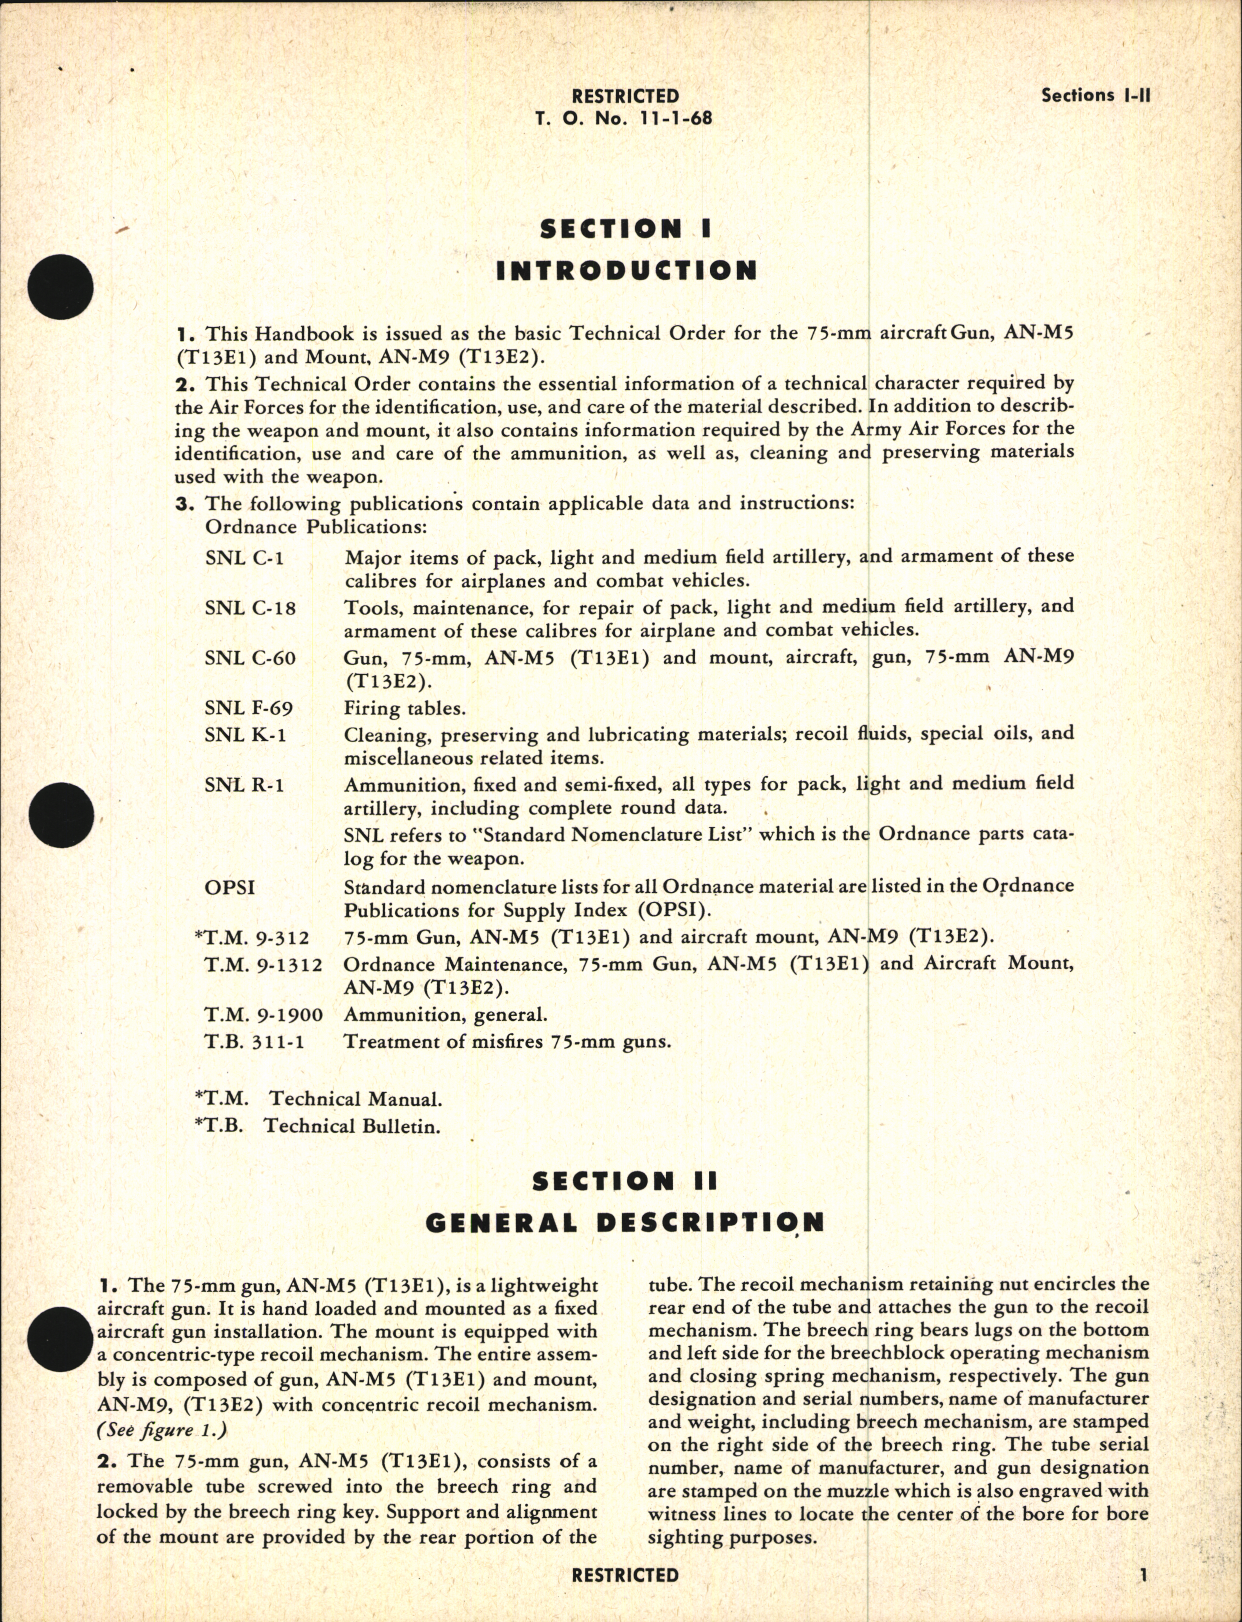 Sample page 5 from AirCorps Library document: Handbook of Instructions with Parts Catalog for 75-MM Aircraft Gun, AN-M5 (T13E1) and AN-M9 (T13E2)